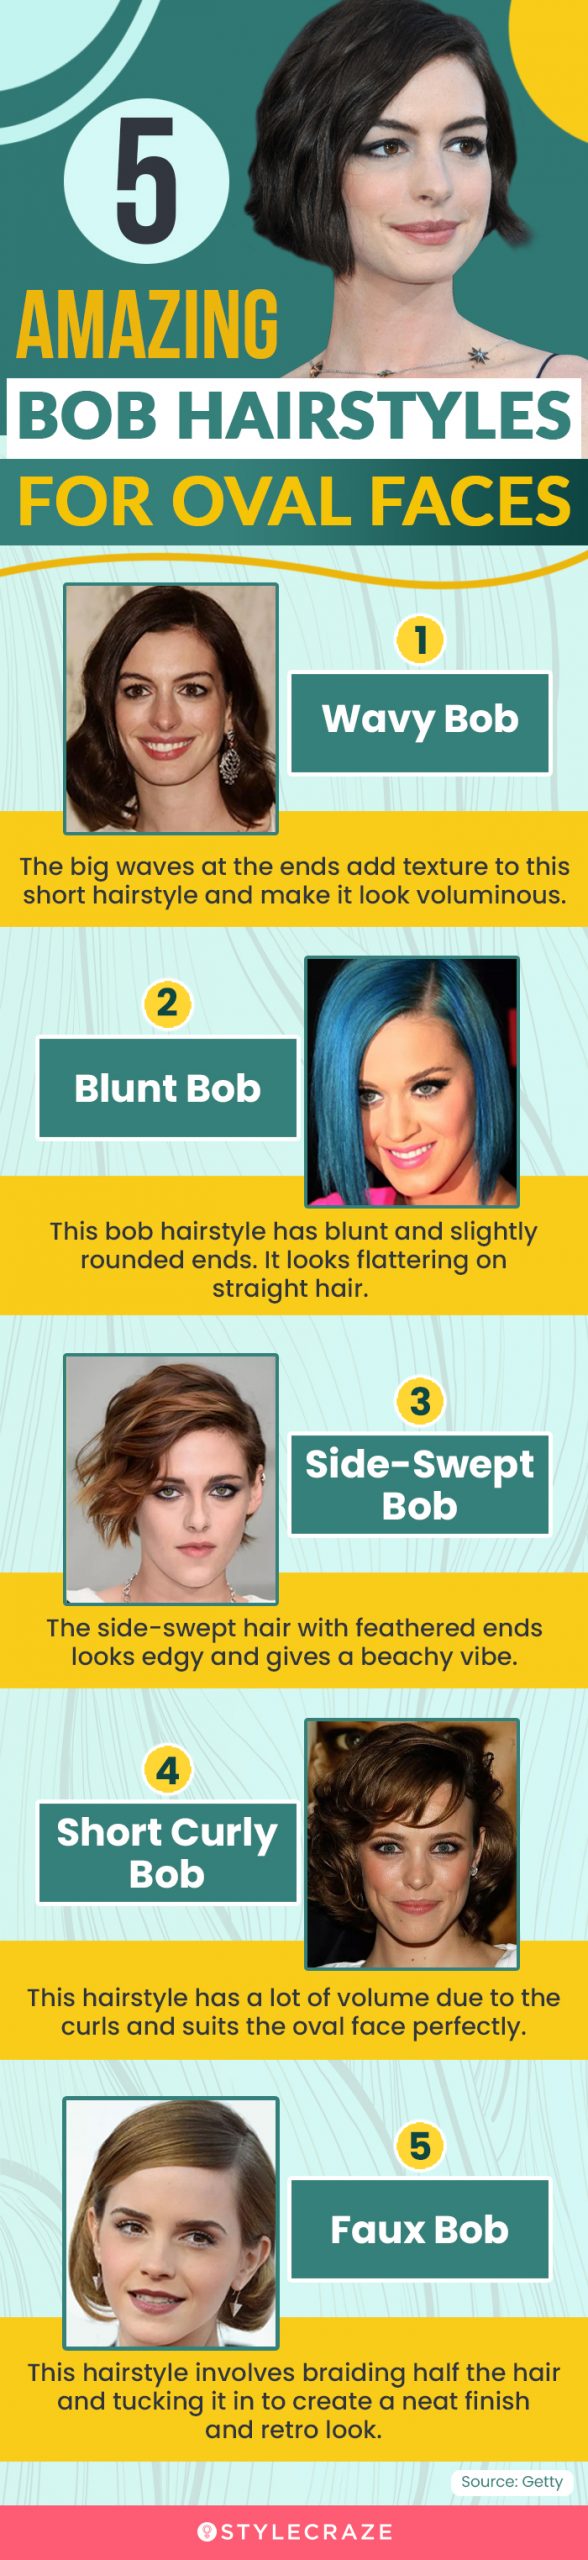 5 amazing bob hairstyle for oval faces (infographic)